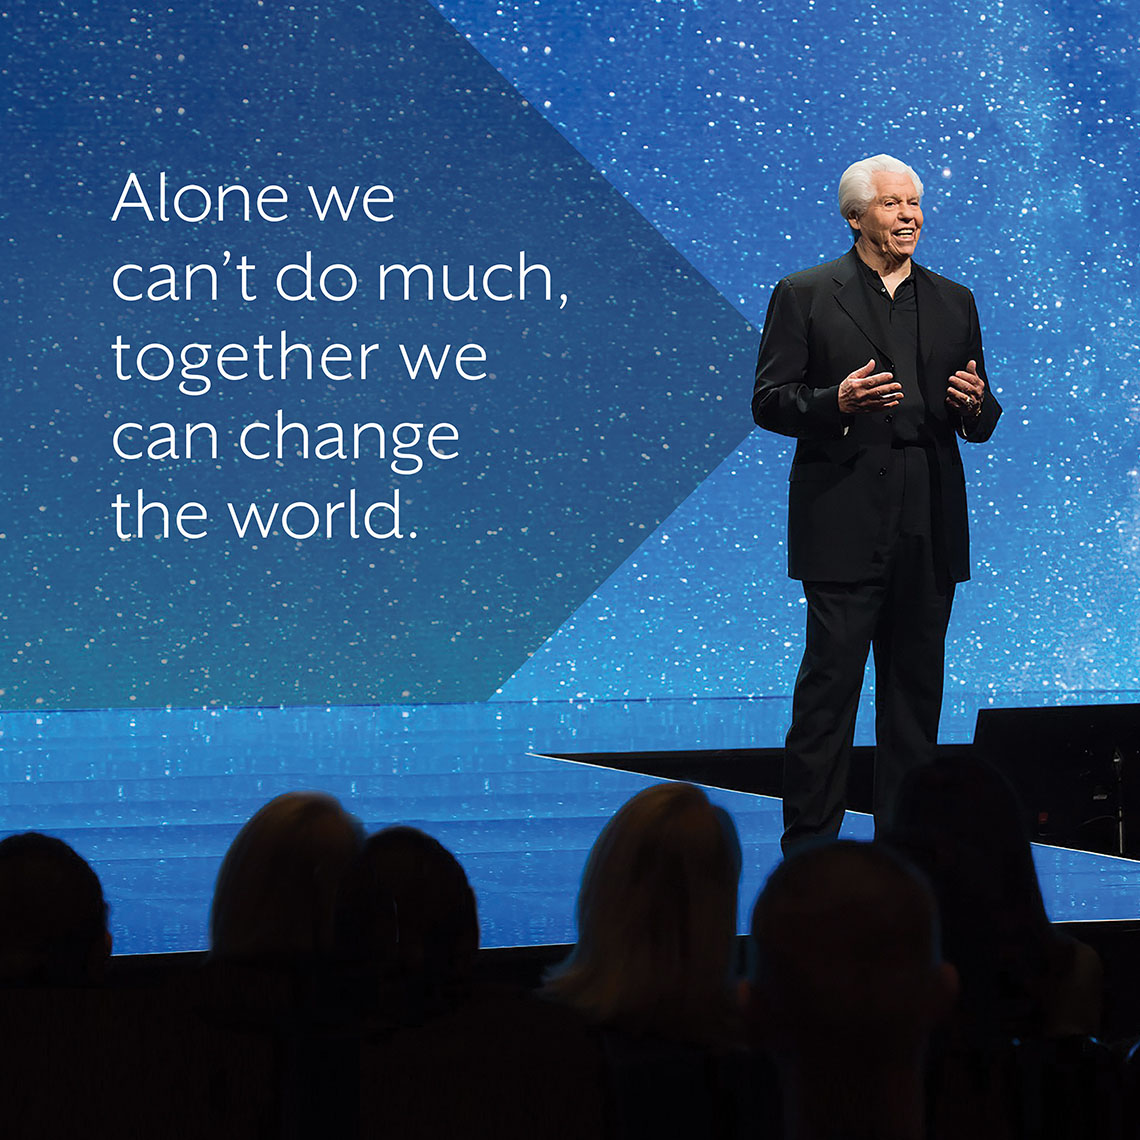 Bill Austin standing on a stage next to the quote 'Alone we can't do much, together we can change the world.'